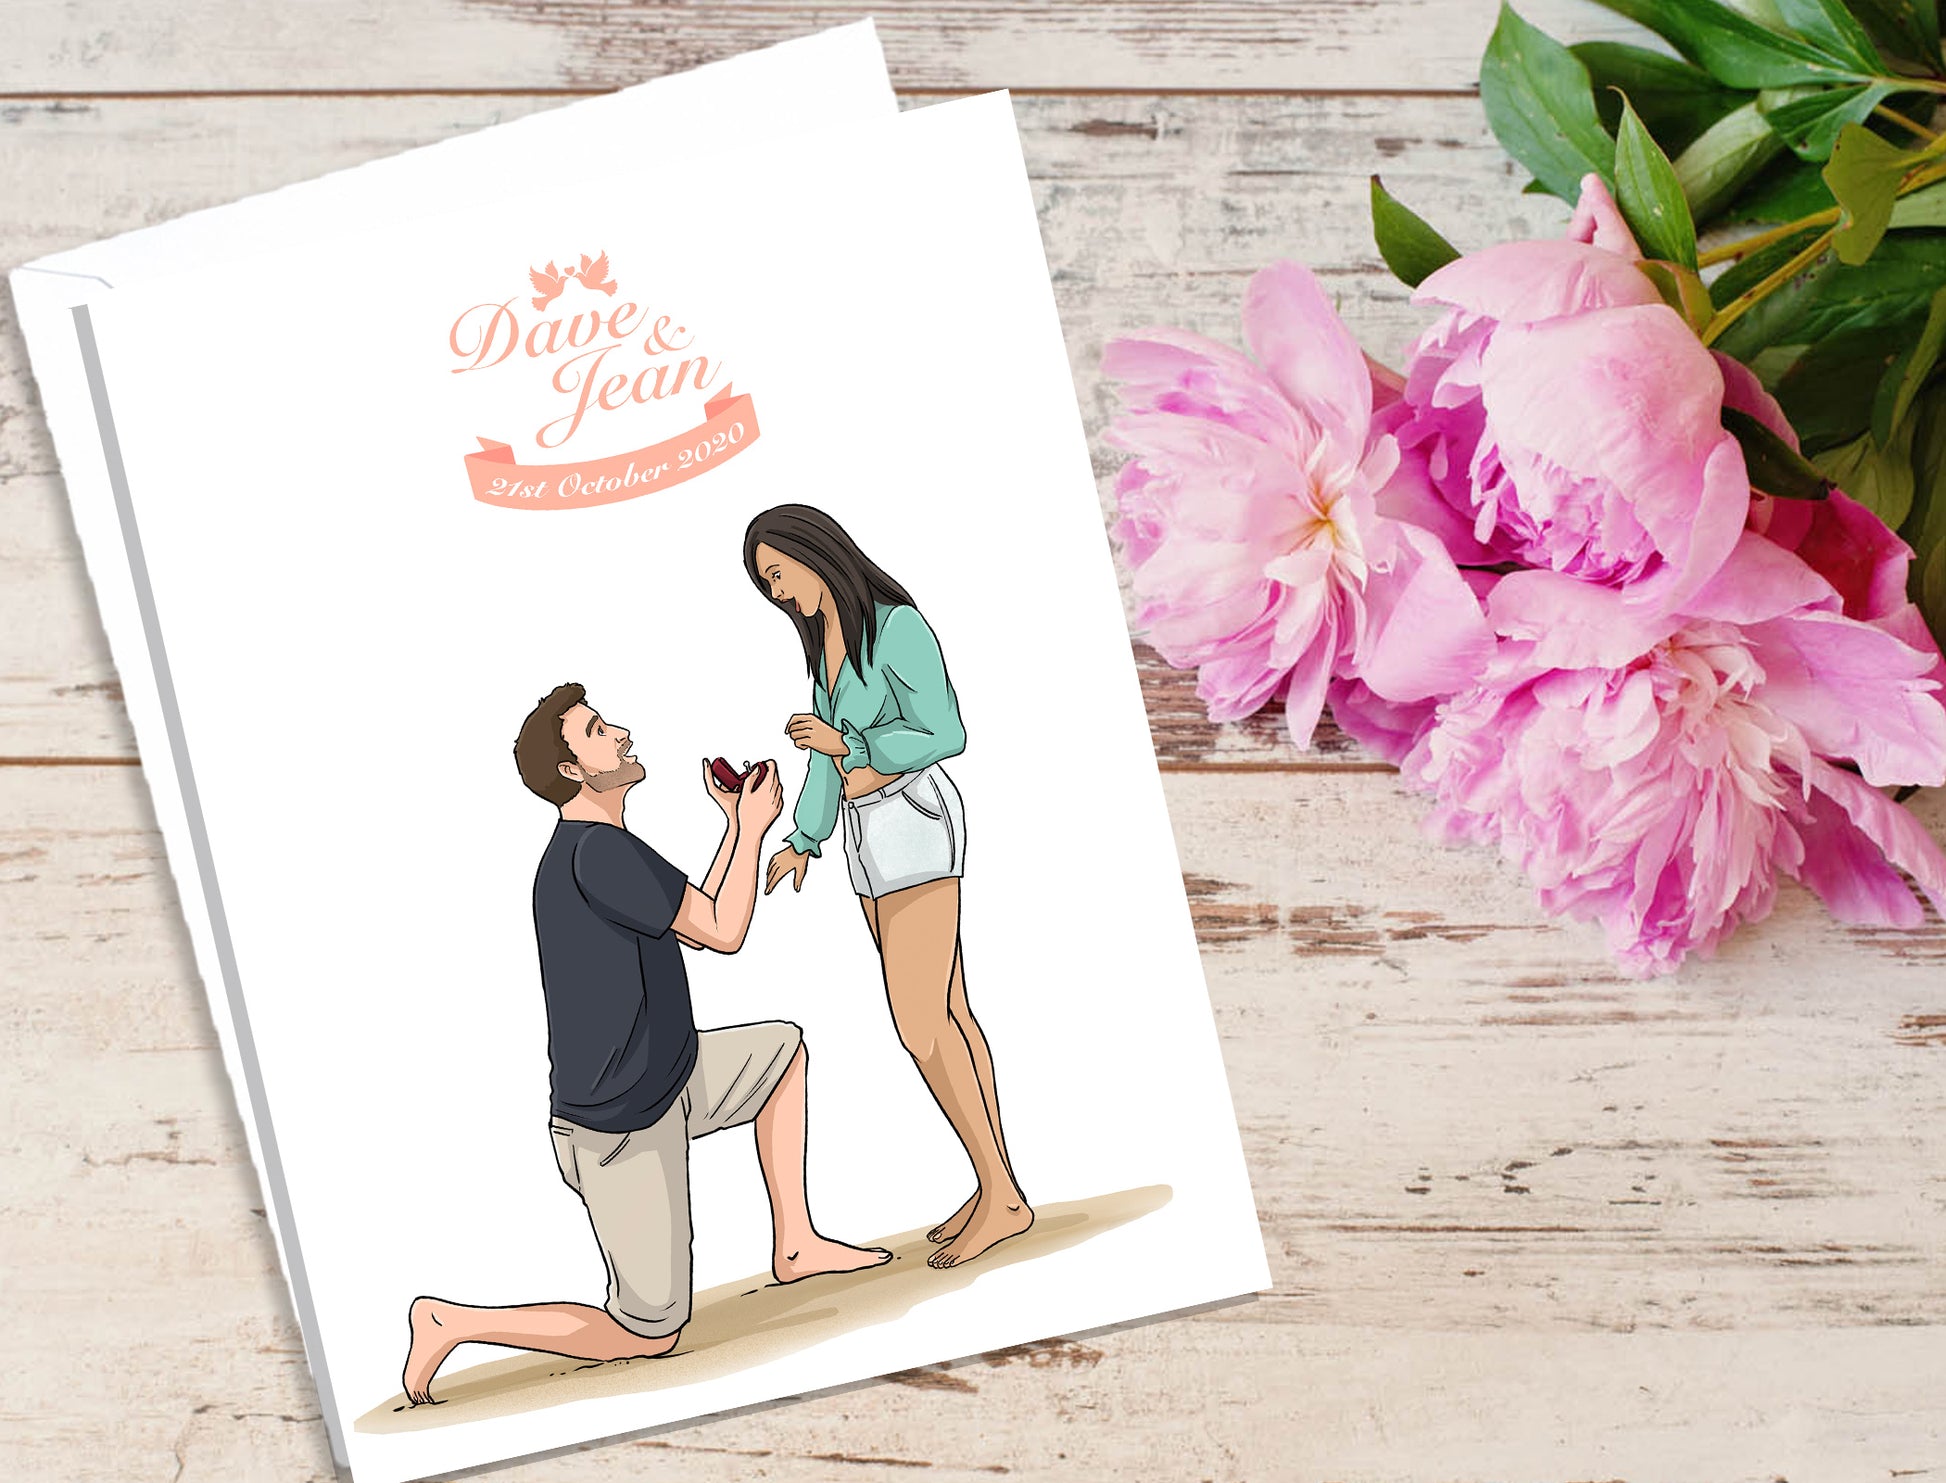 Save The Date - Wedding Invitation -  Engagement Party - Proposal Gift - Make Me A Comic Ltd